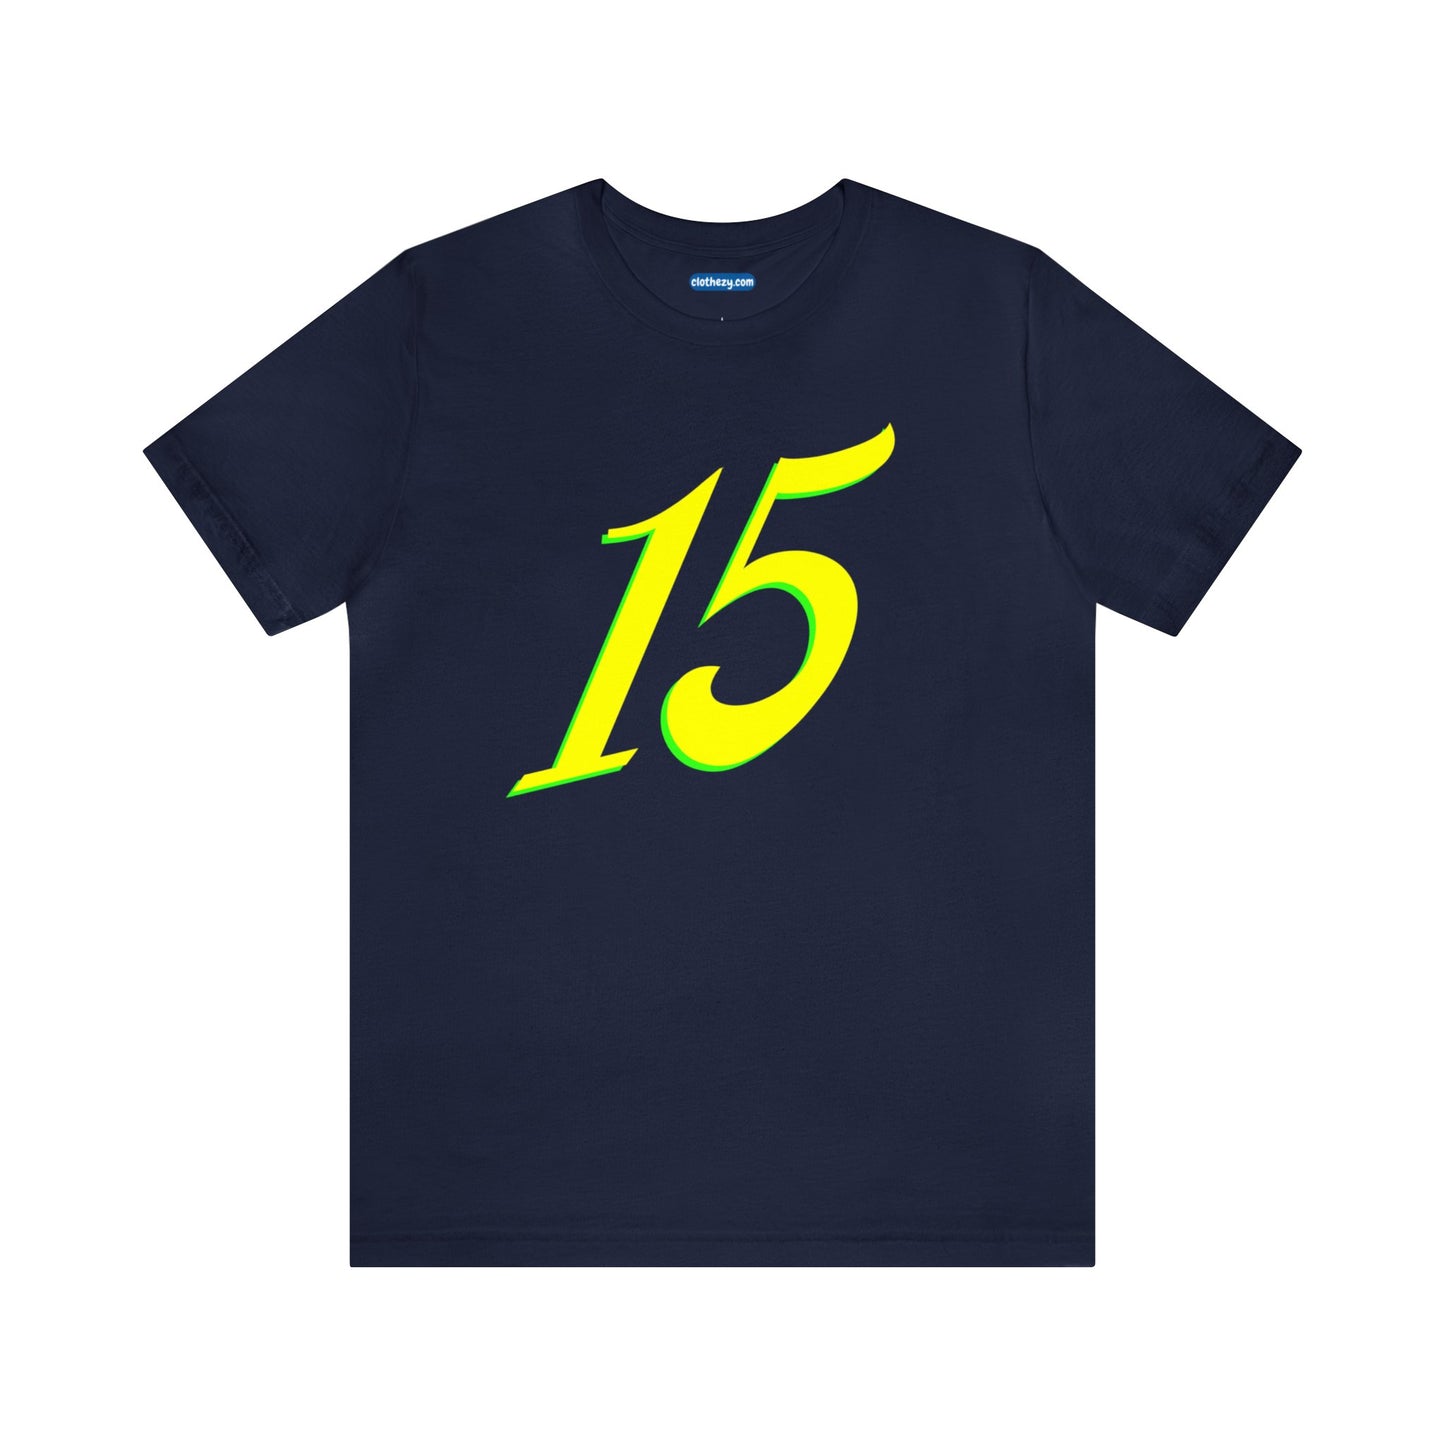 Number 15 Design - Soft Cotton Tee for birthdays and celebrations, Gift for friends and family, Multiple Options by clothezy.com in Orange Size Small - Buy Now